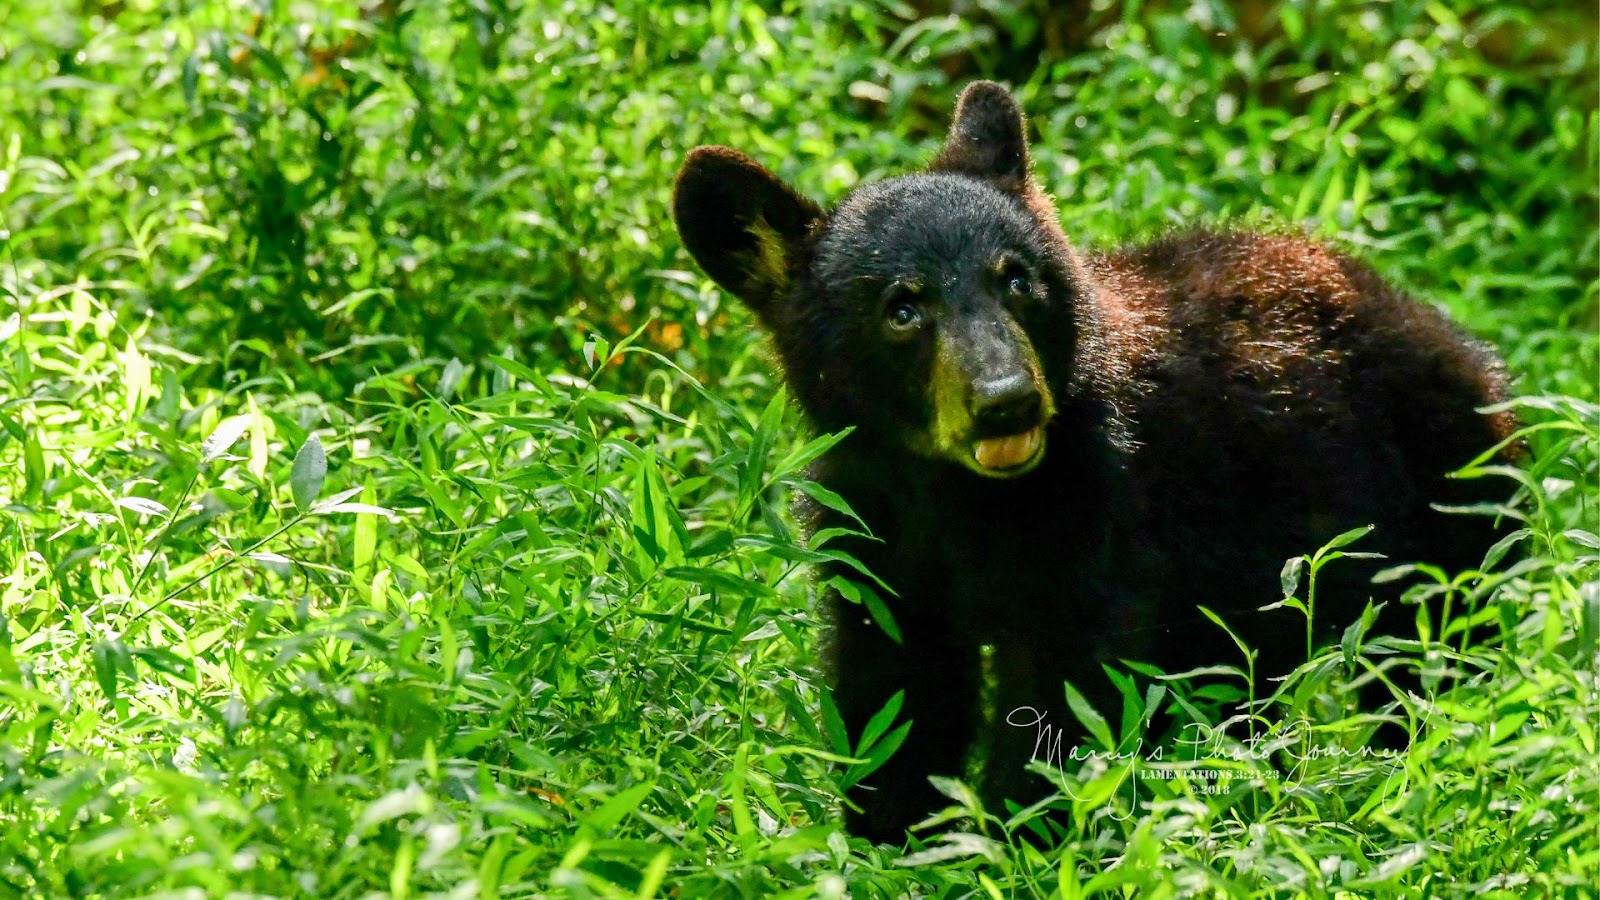 a small black bear standing in a lush green field